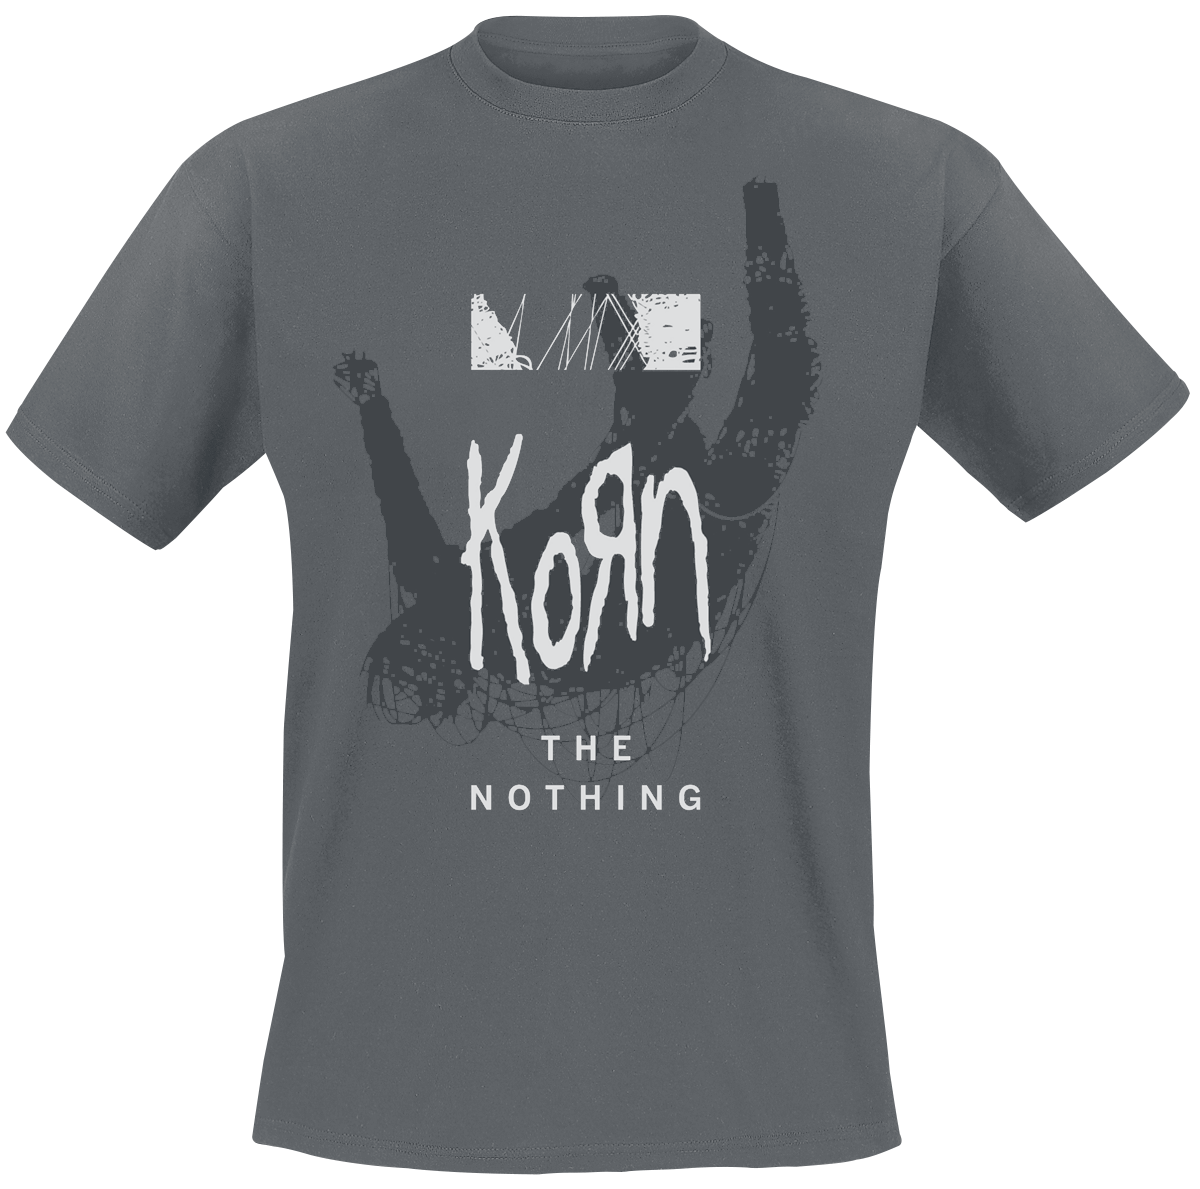 Korn - The Nothing - Overlay - T-Shirt - charcoal image